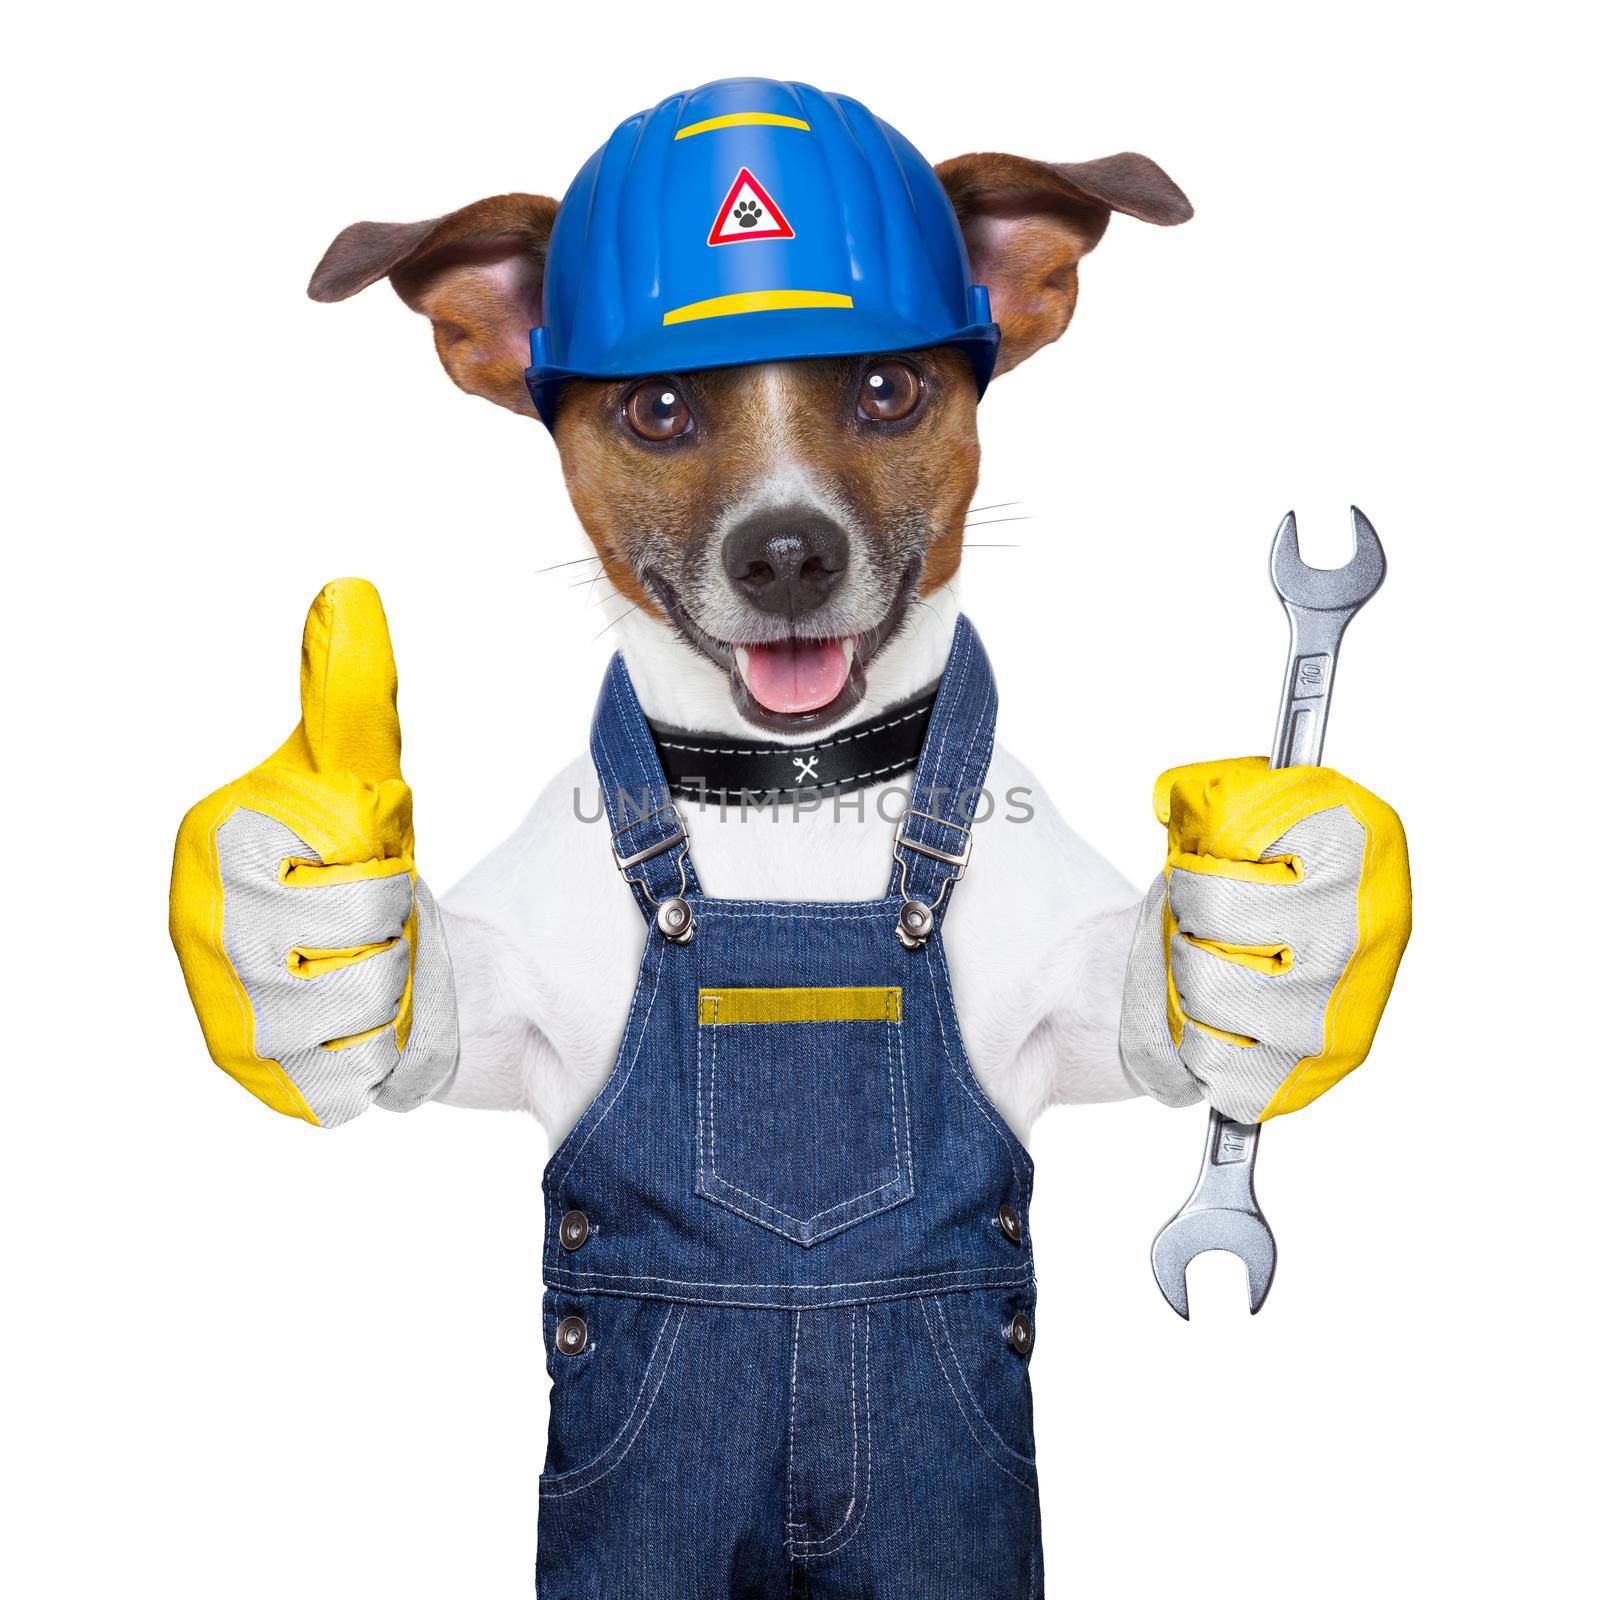 craftsman dog with one thumb up holding a tool